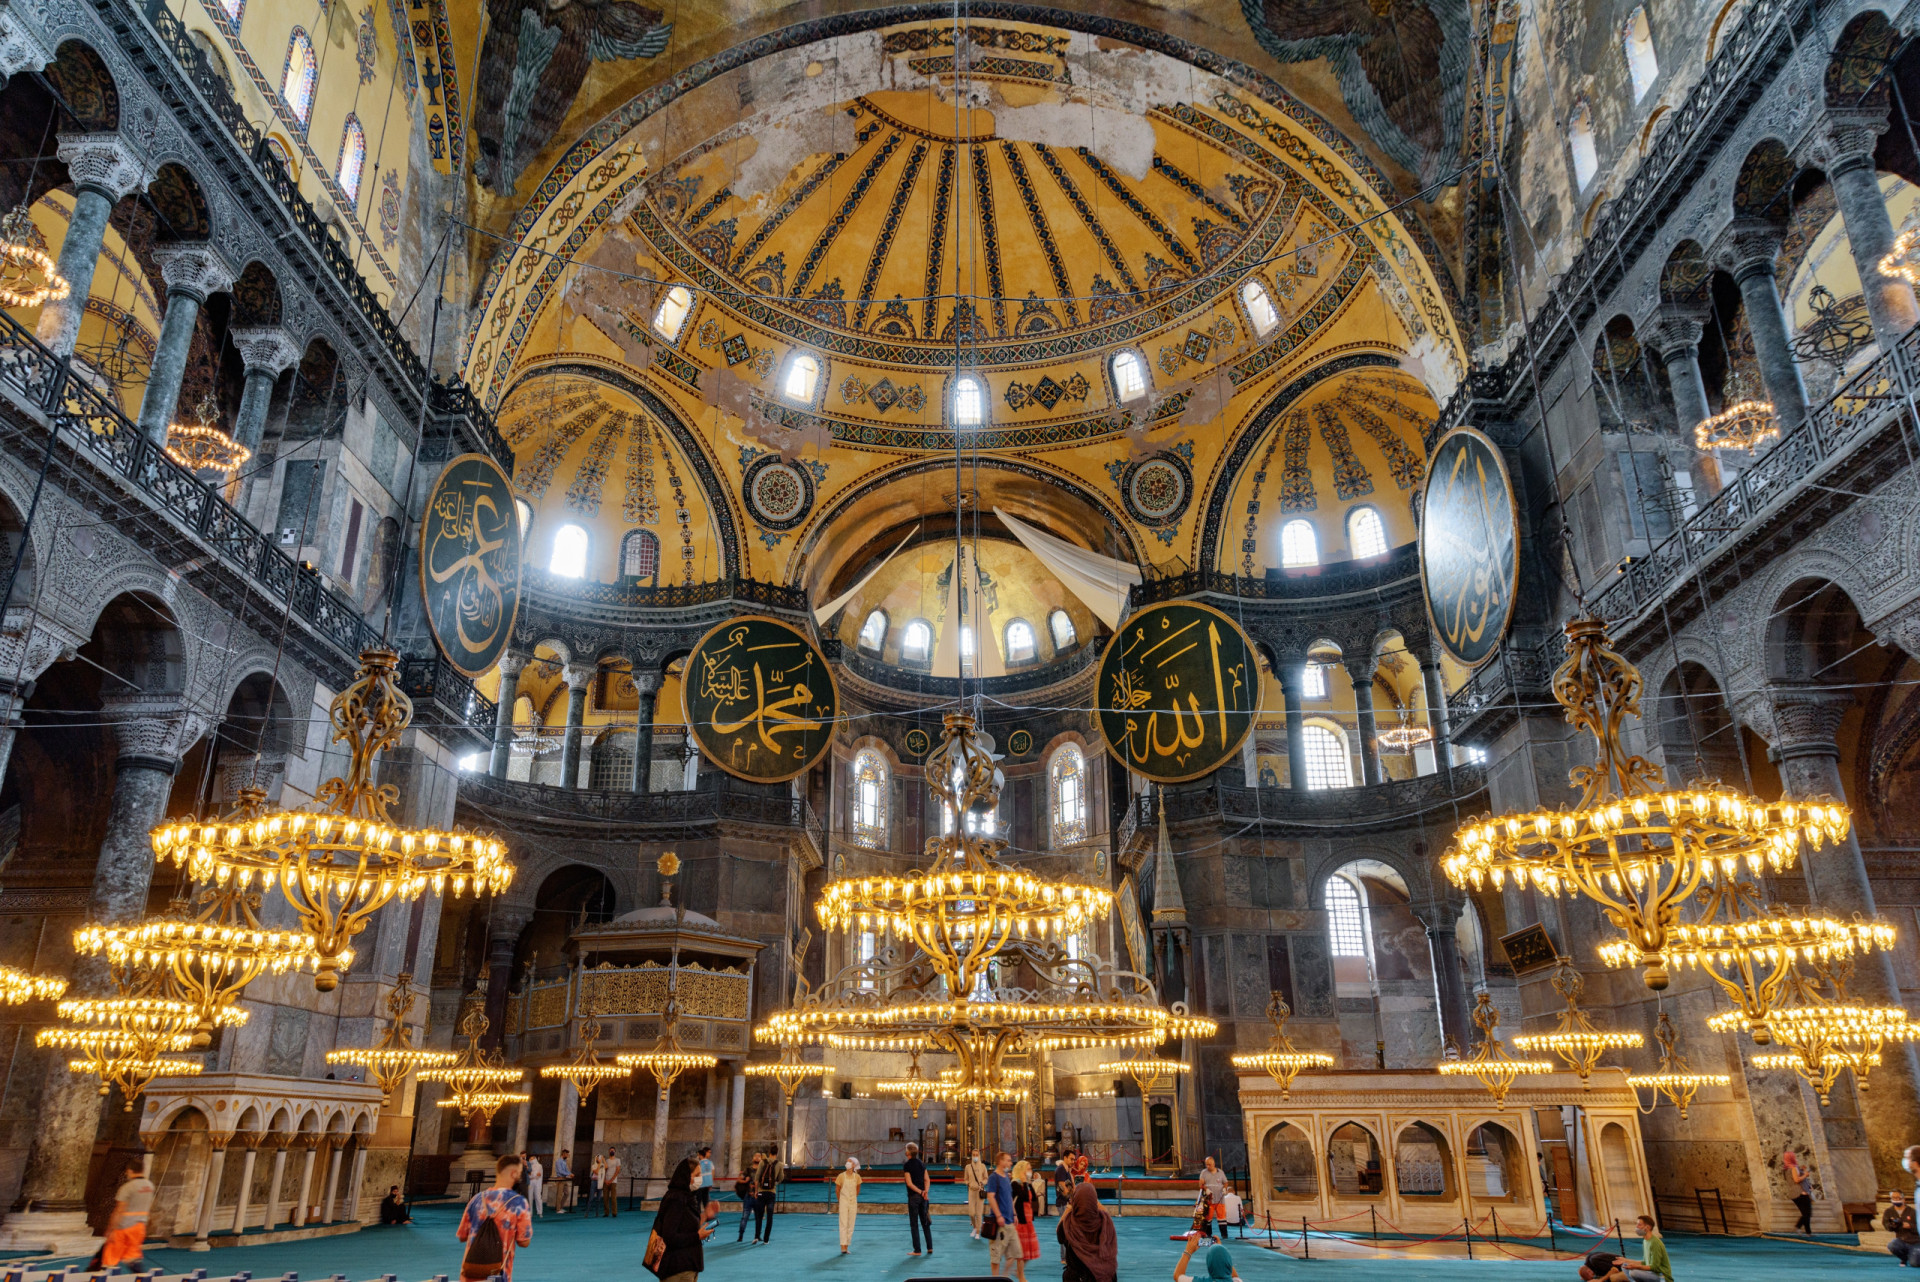 <p>This architectural marvel, a testament to both Byzantine and Ottoman heritage, will undergo interior restoration. These efforts are essential to maintain the structural integrity and historical value of this ancient monument.</p><p><a href="https://www.msn.com/en-us/community/channel/vid-7xx8mnucu55yw63we9va2gwr7uihbxwc68fxqp25x6tg4ftibpra?cvid=94631541bc0f4f89bfd59158d696ad7e">Follow us and access great exclusive content every day</a></p>